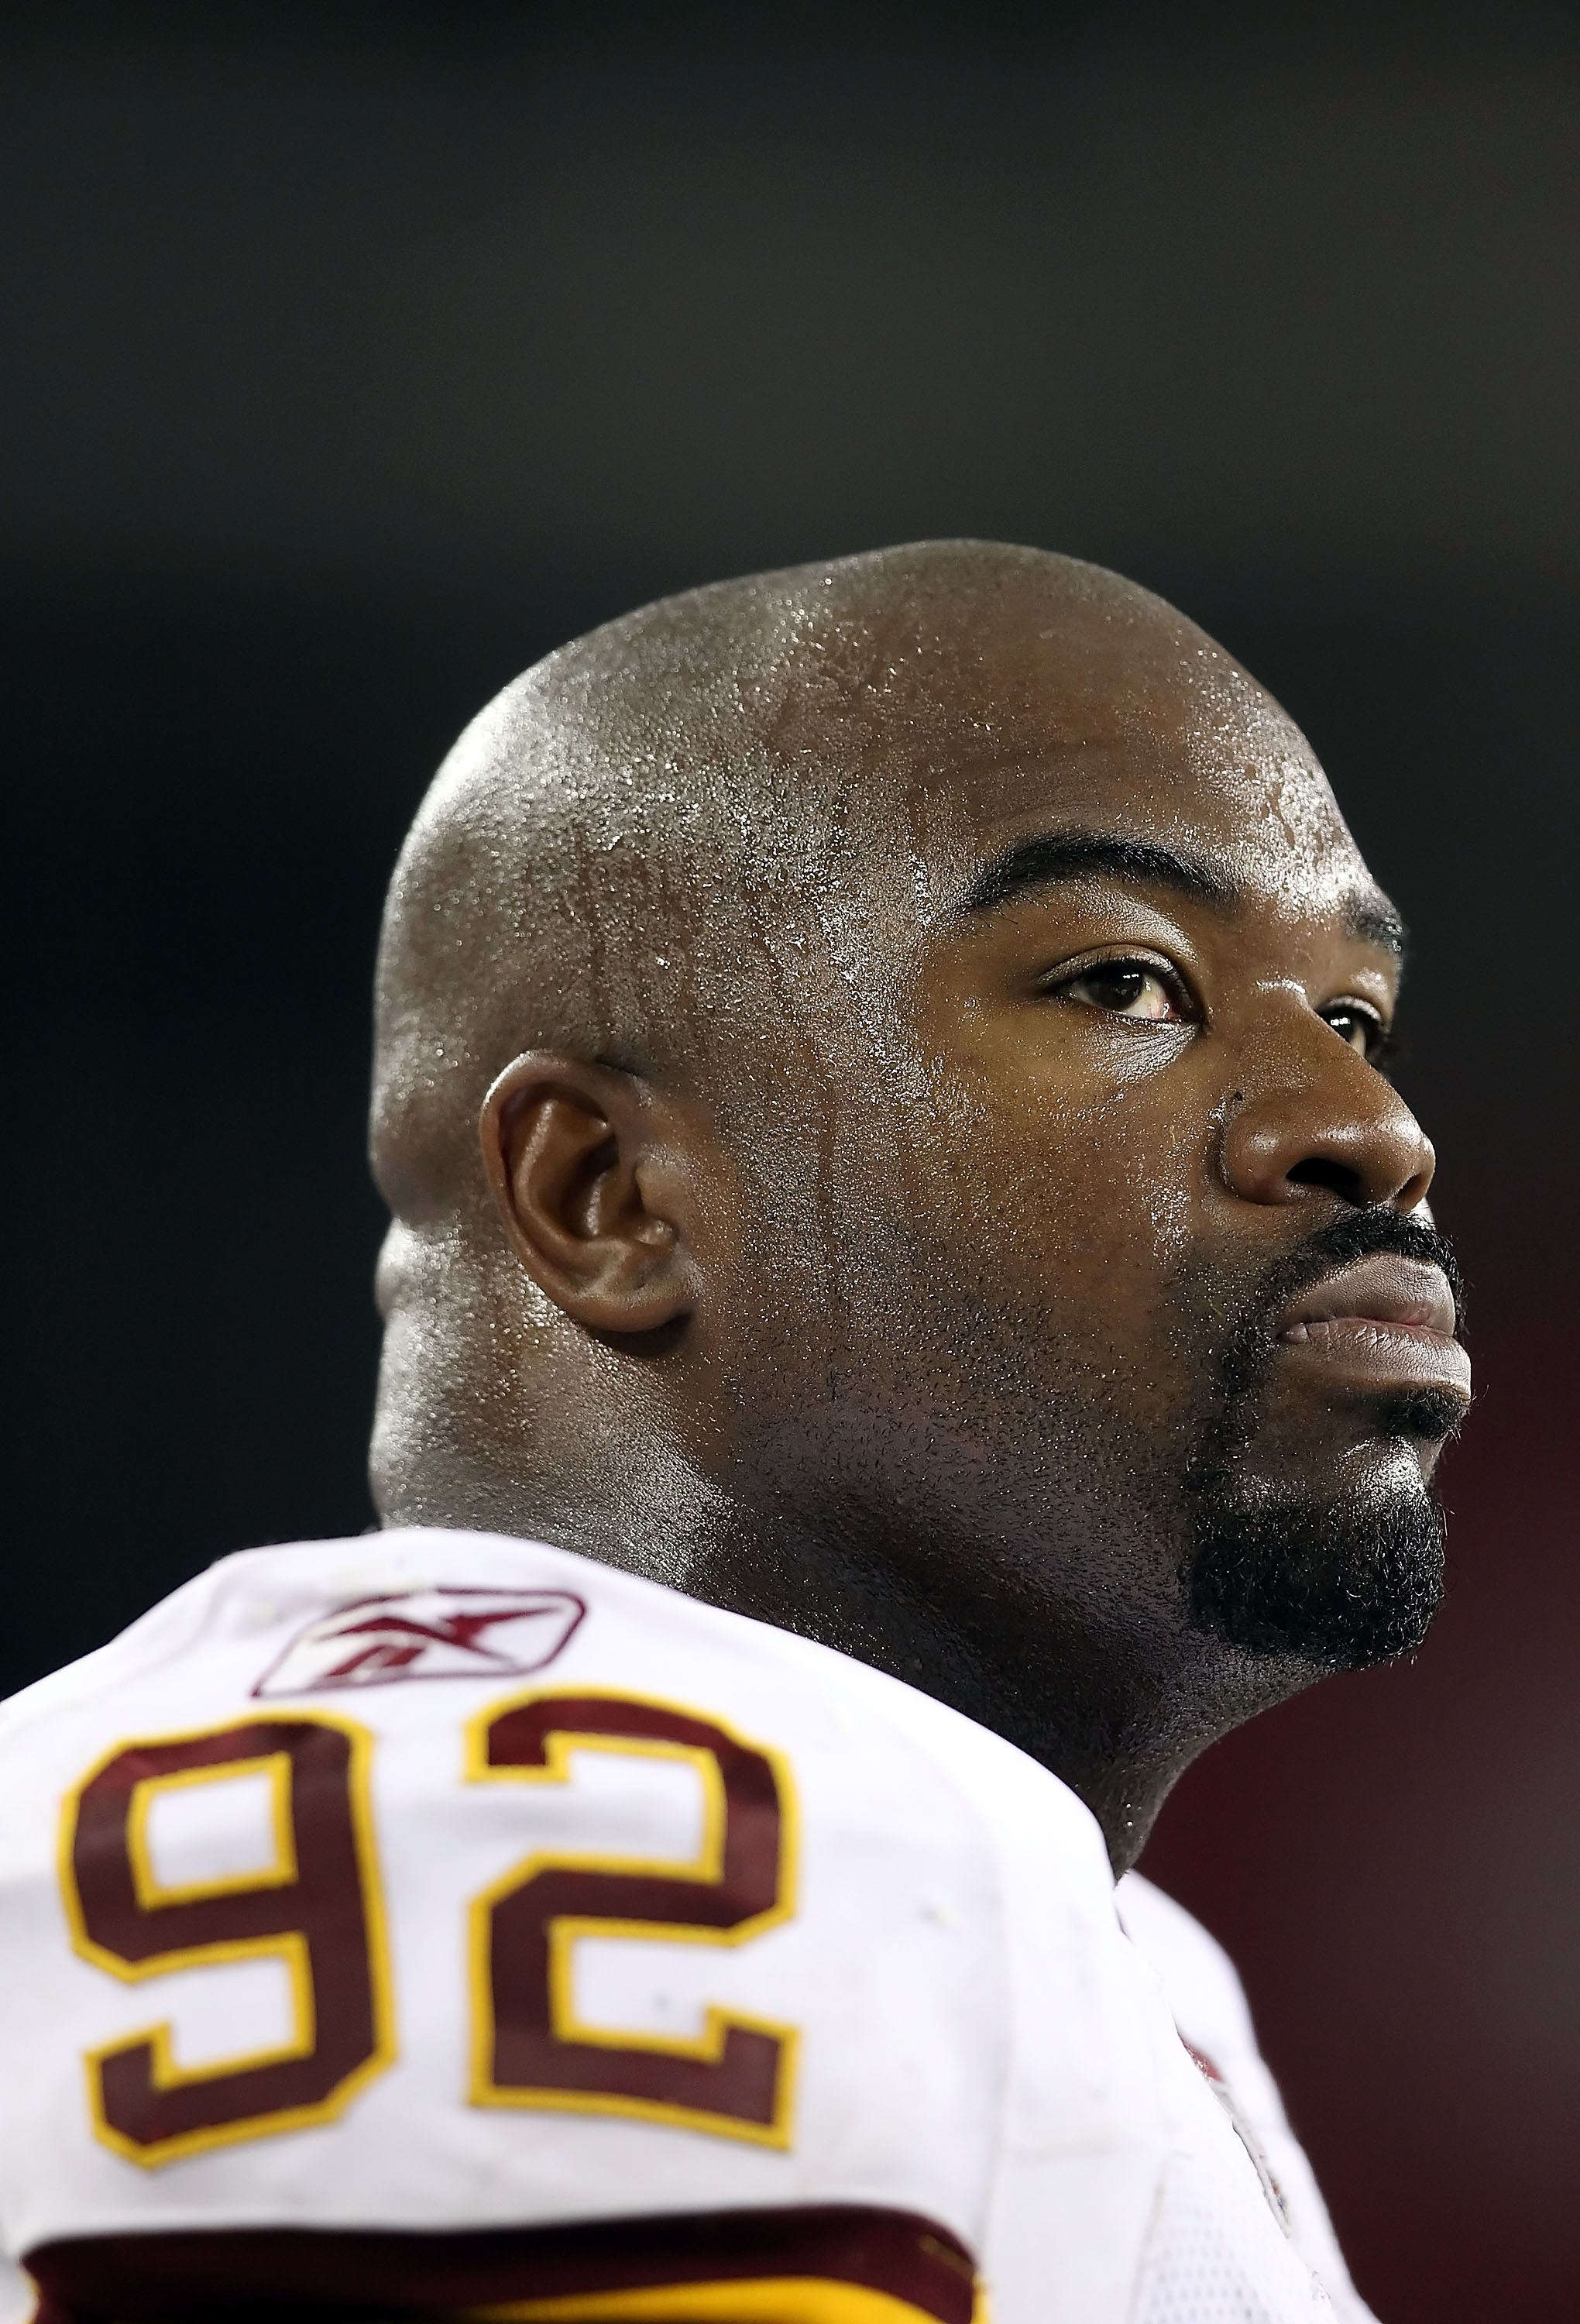 GLENDALE, AZ - SEPTEMBER 02:  Defensive tackle Albert Haynesworth #92 of the Washington Redskins stands on the sidelines during preseason NFL game against the Arizona Cardinals at the University of Phoenix Stadium on September 2, 2010 in Glendale, Arizona